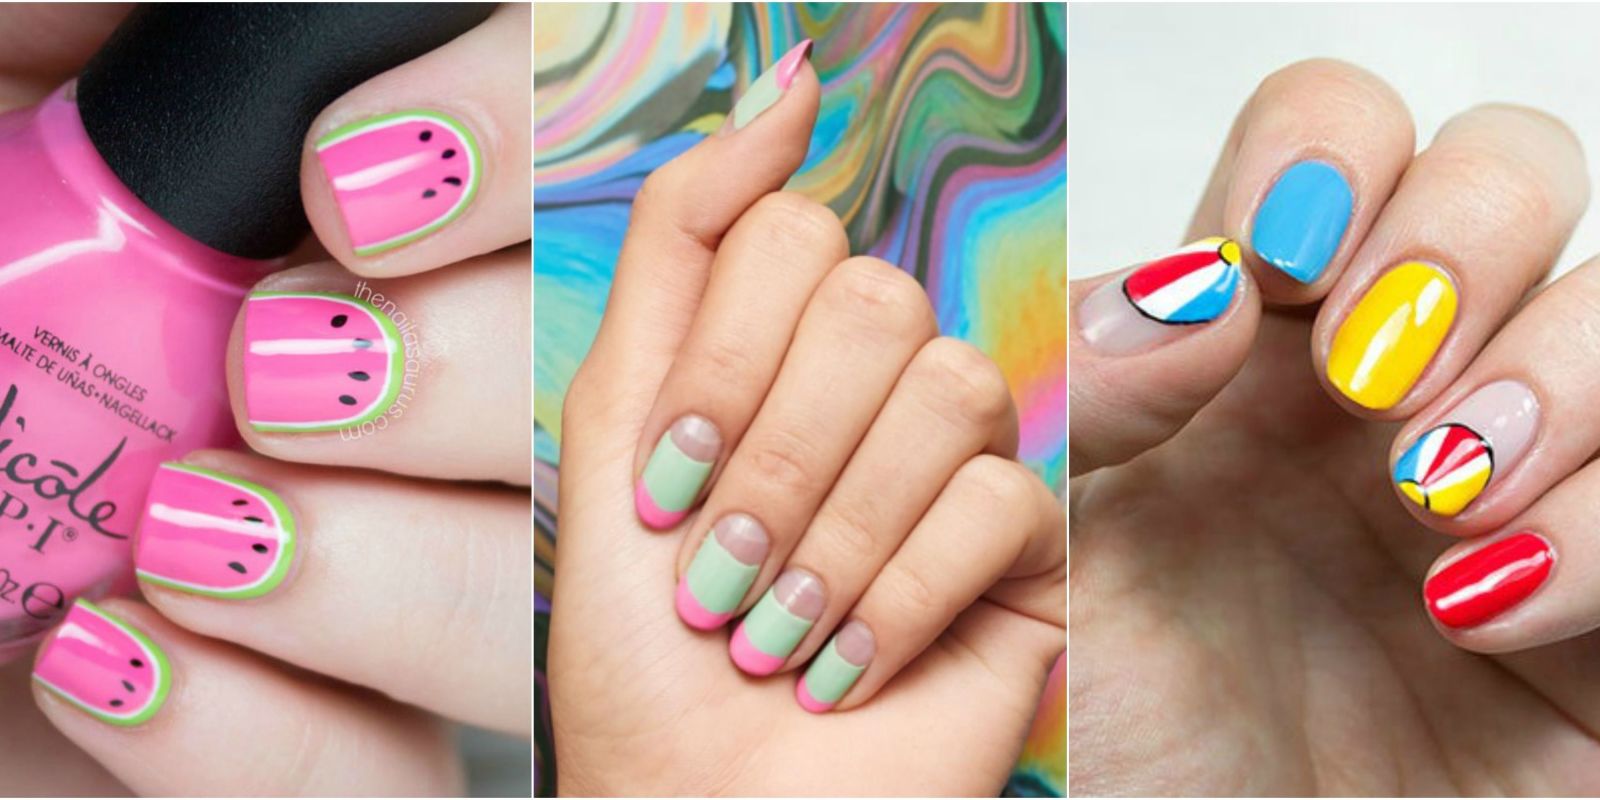 2. Creative Nail Polish Design Ideas to Try at Home - wide 4